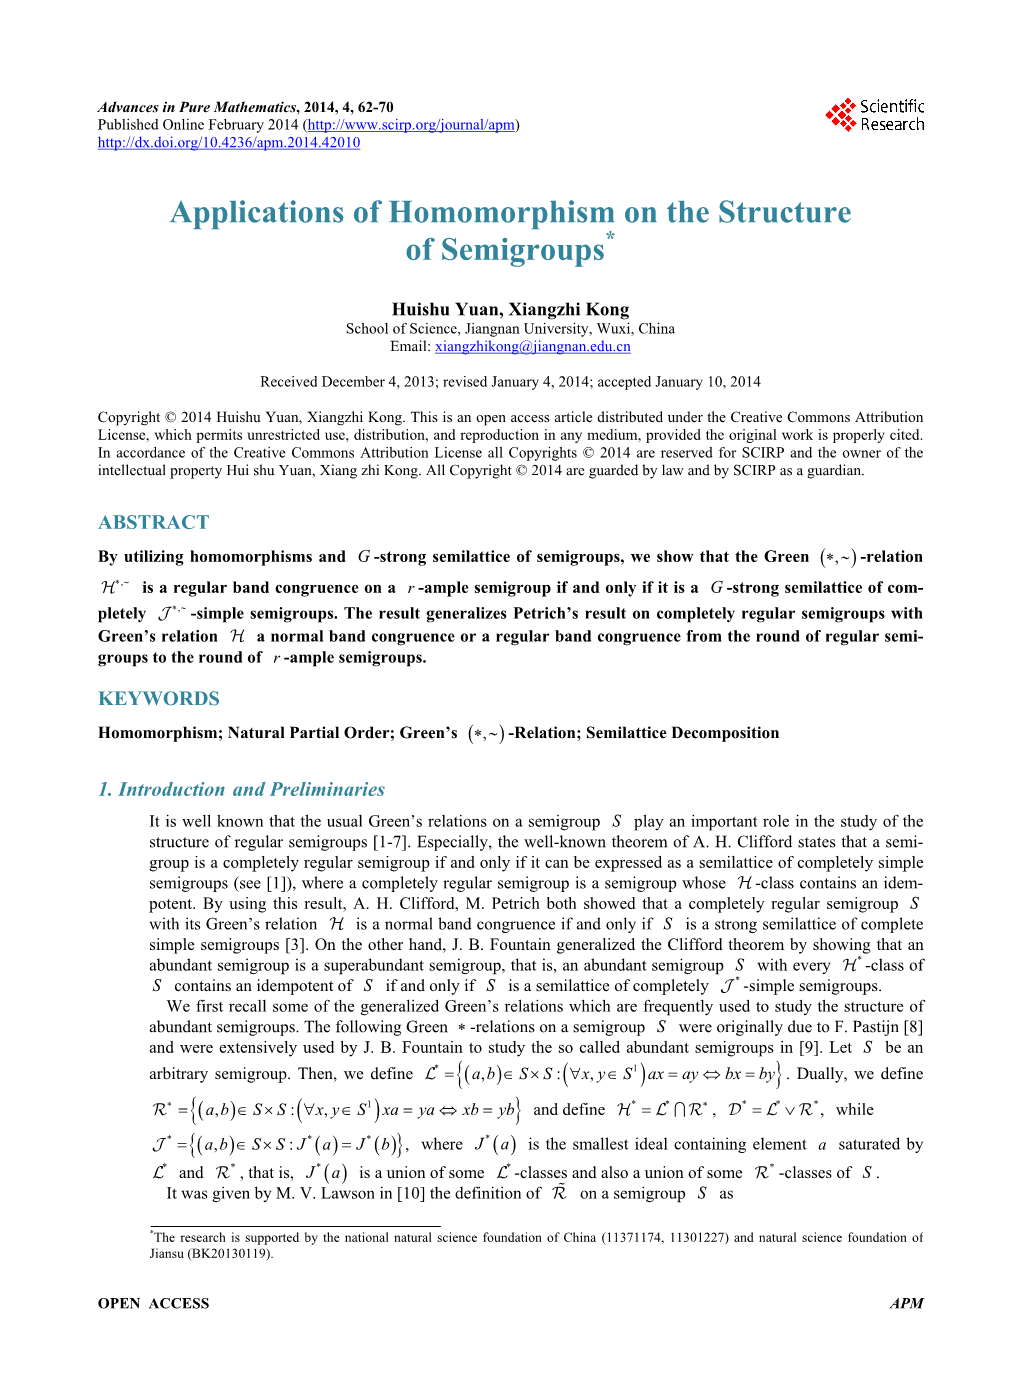 Applications of Homomorphism on the Structure of Semigroups*